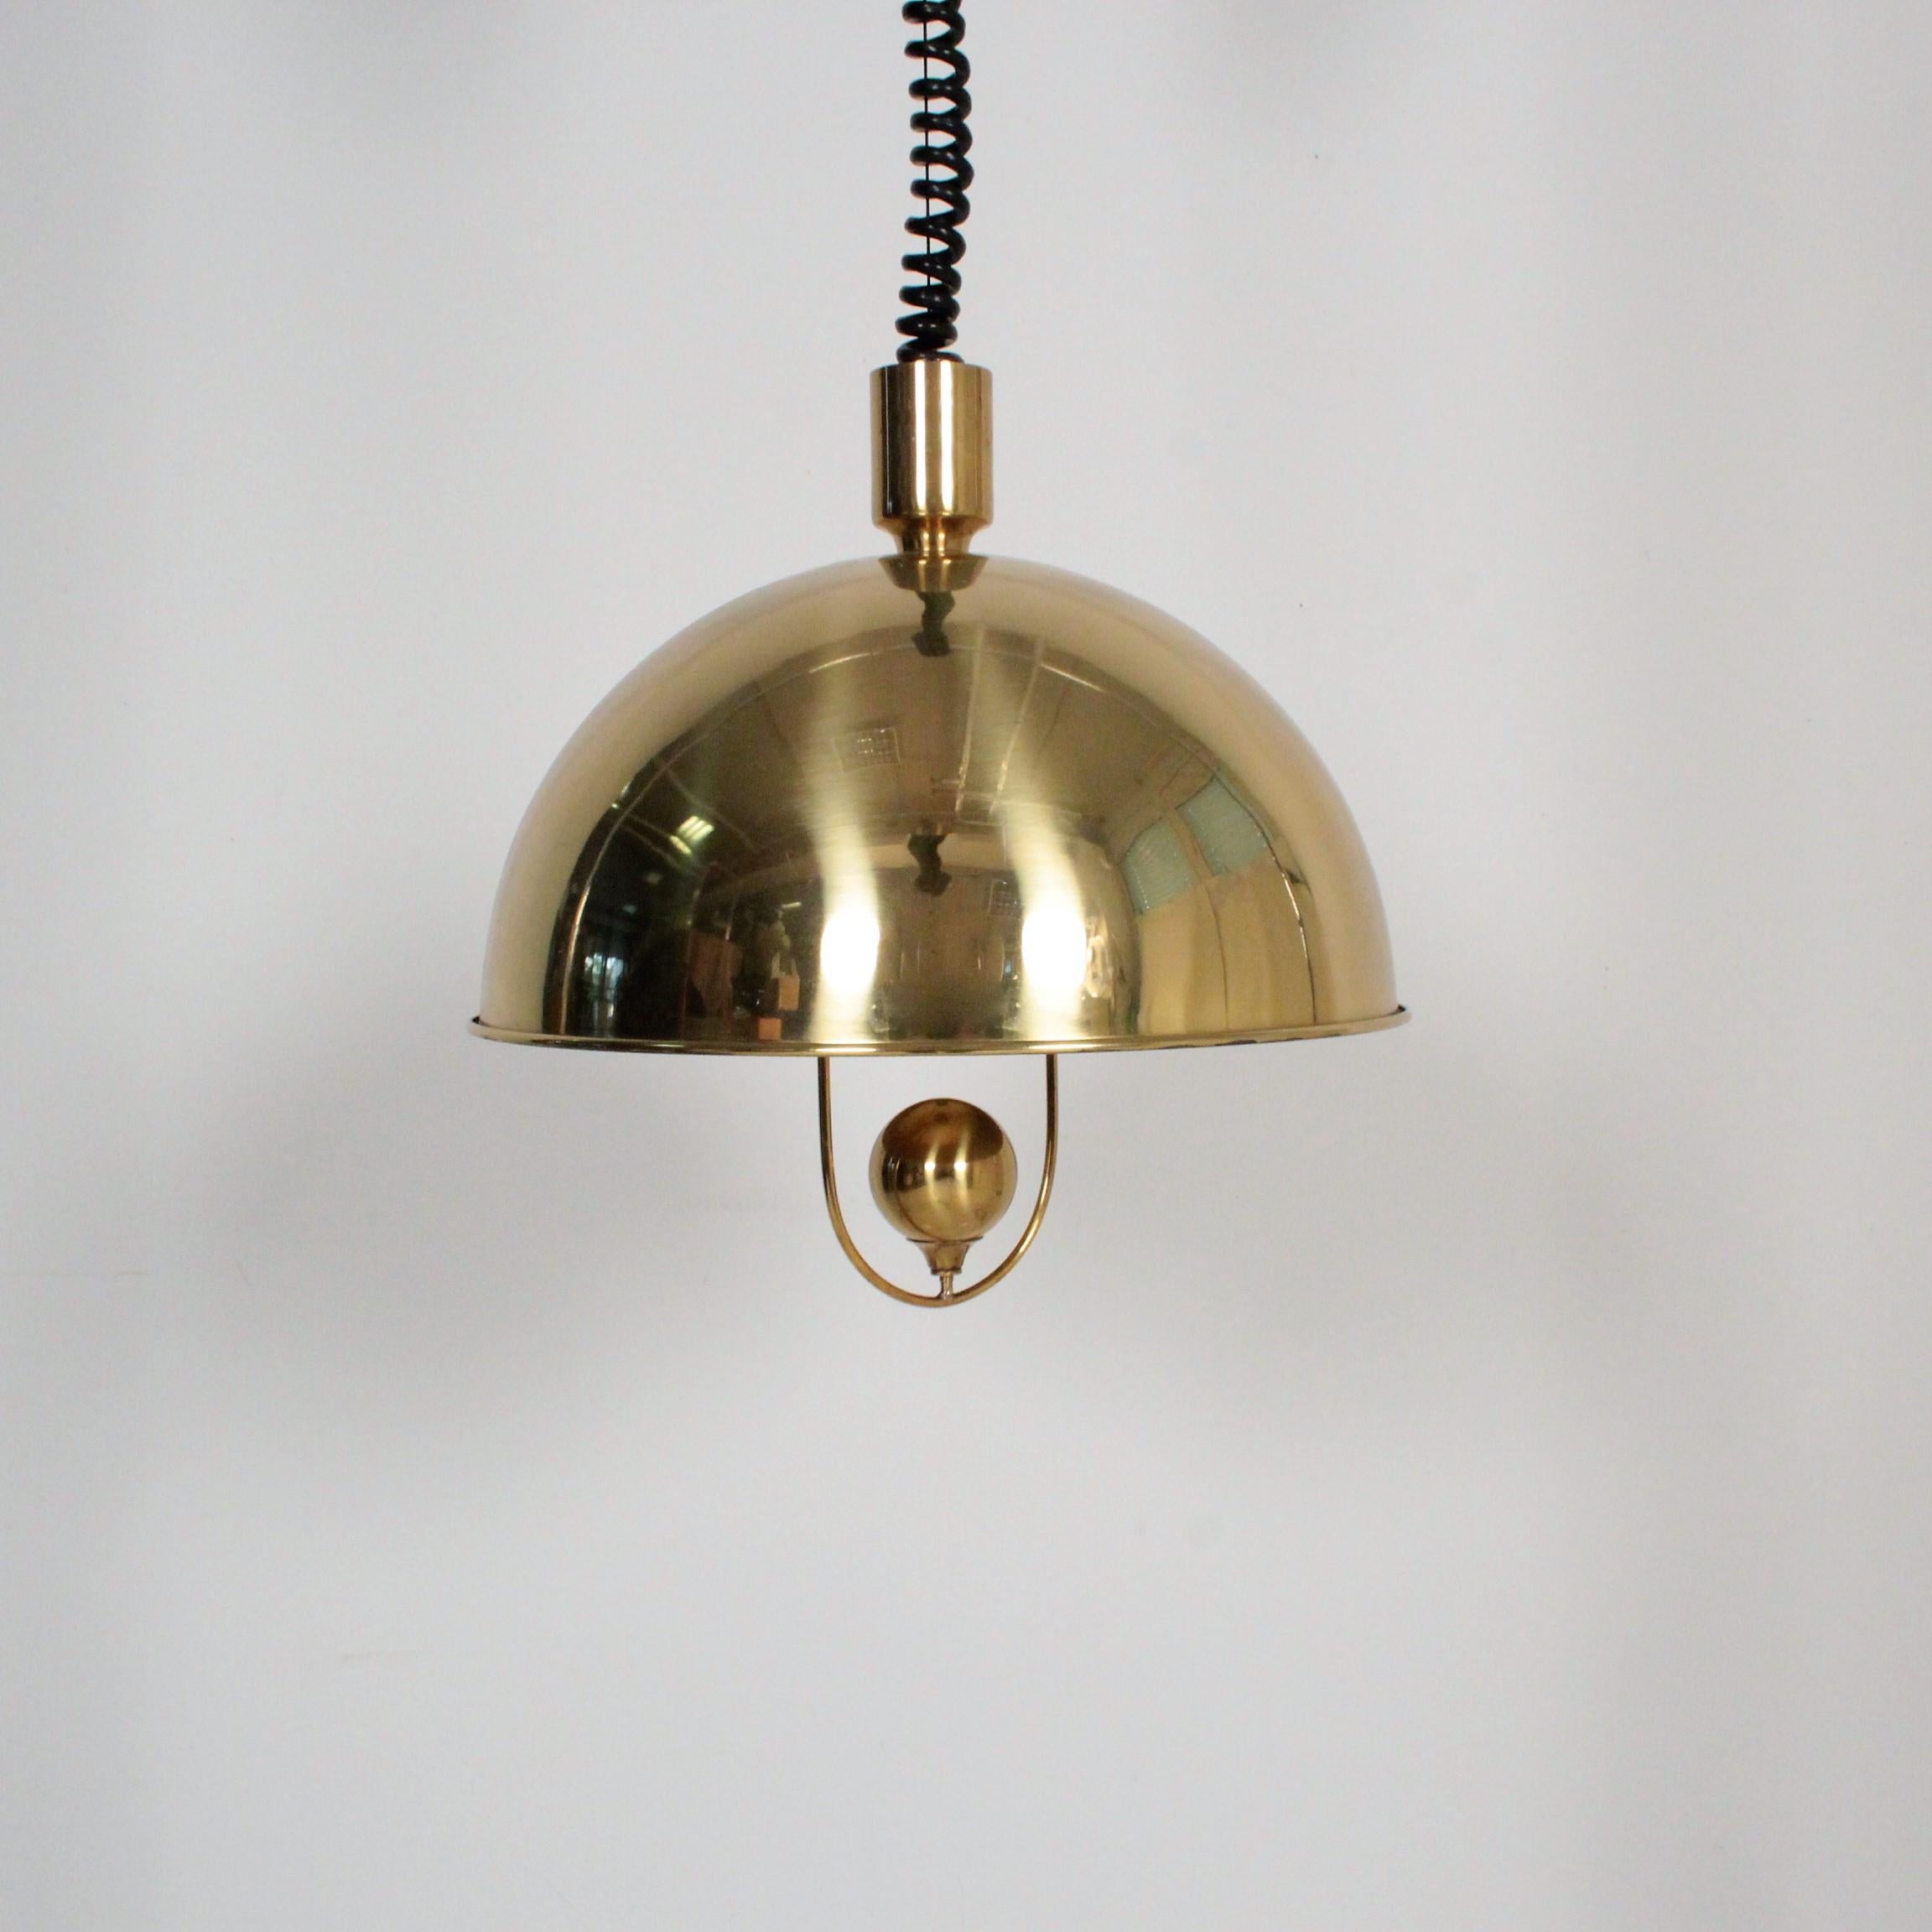 Florian Schulz Pendant Brass with Weight Light, Germany, 1970 For Sale 3